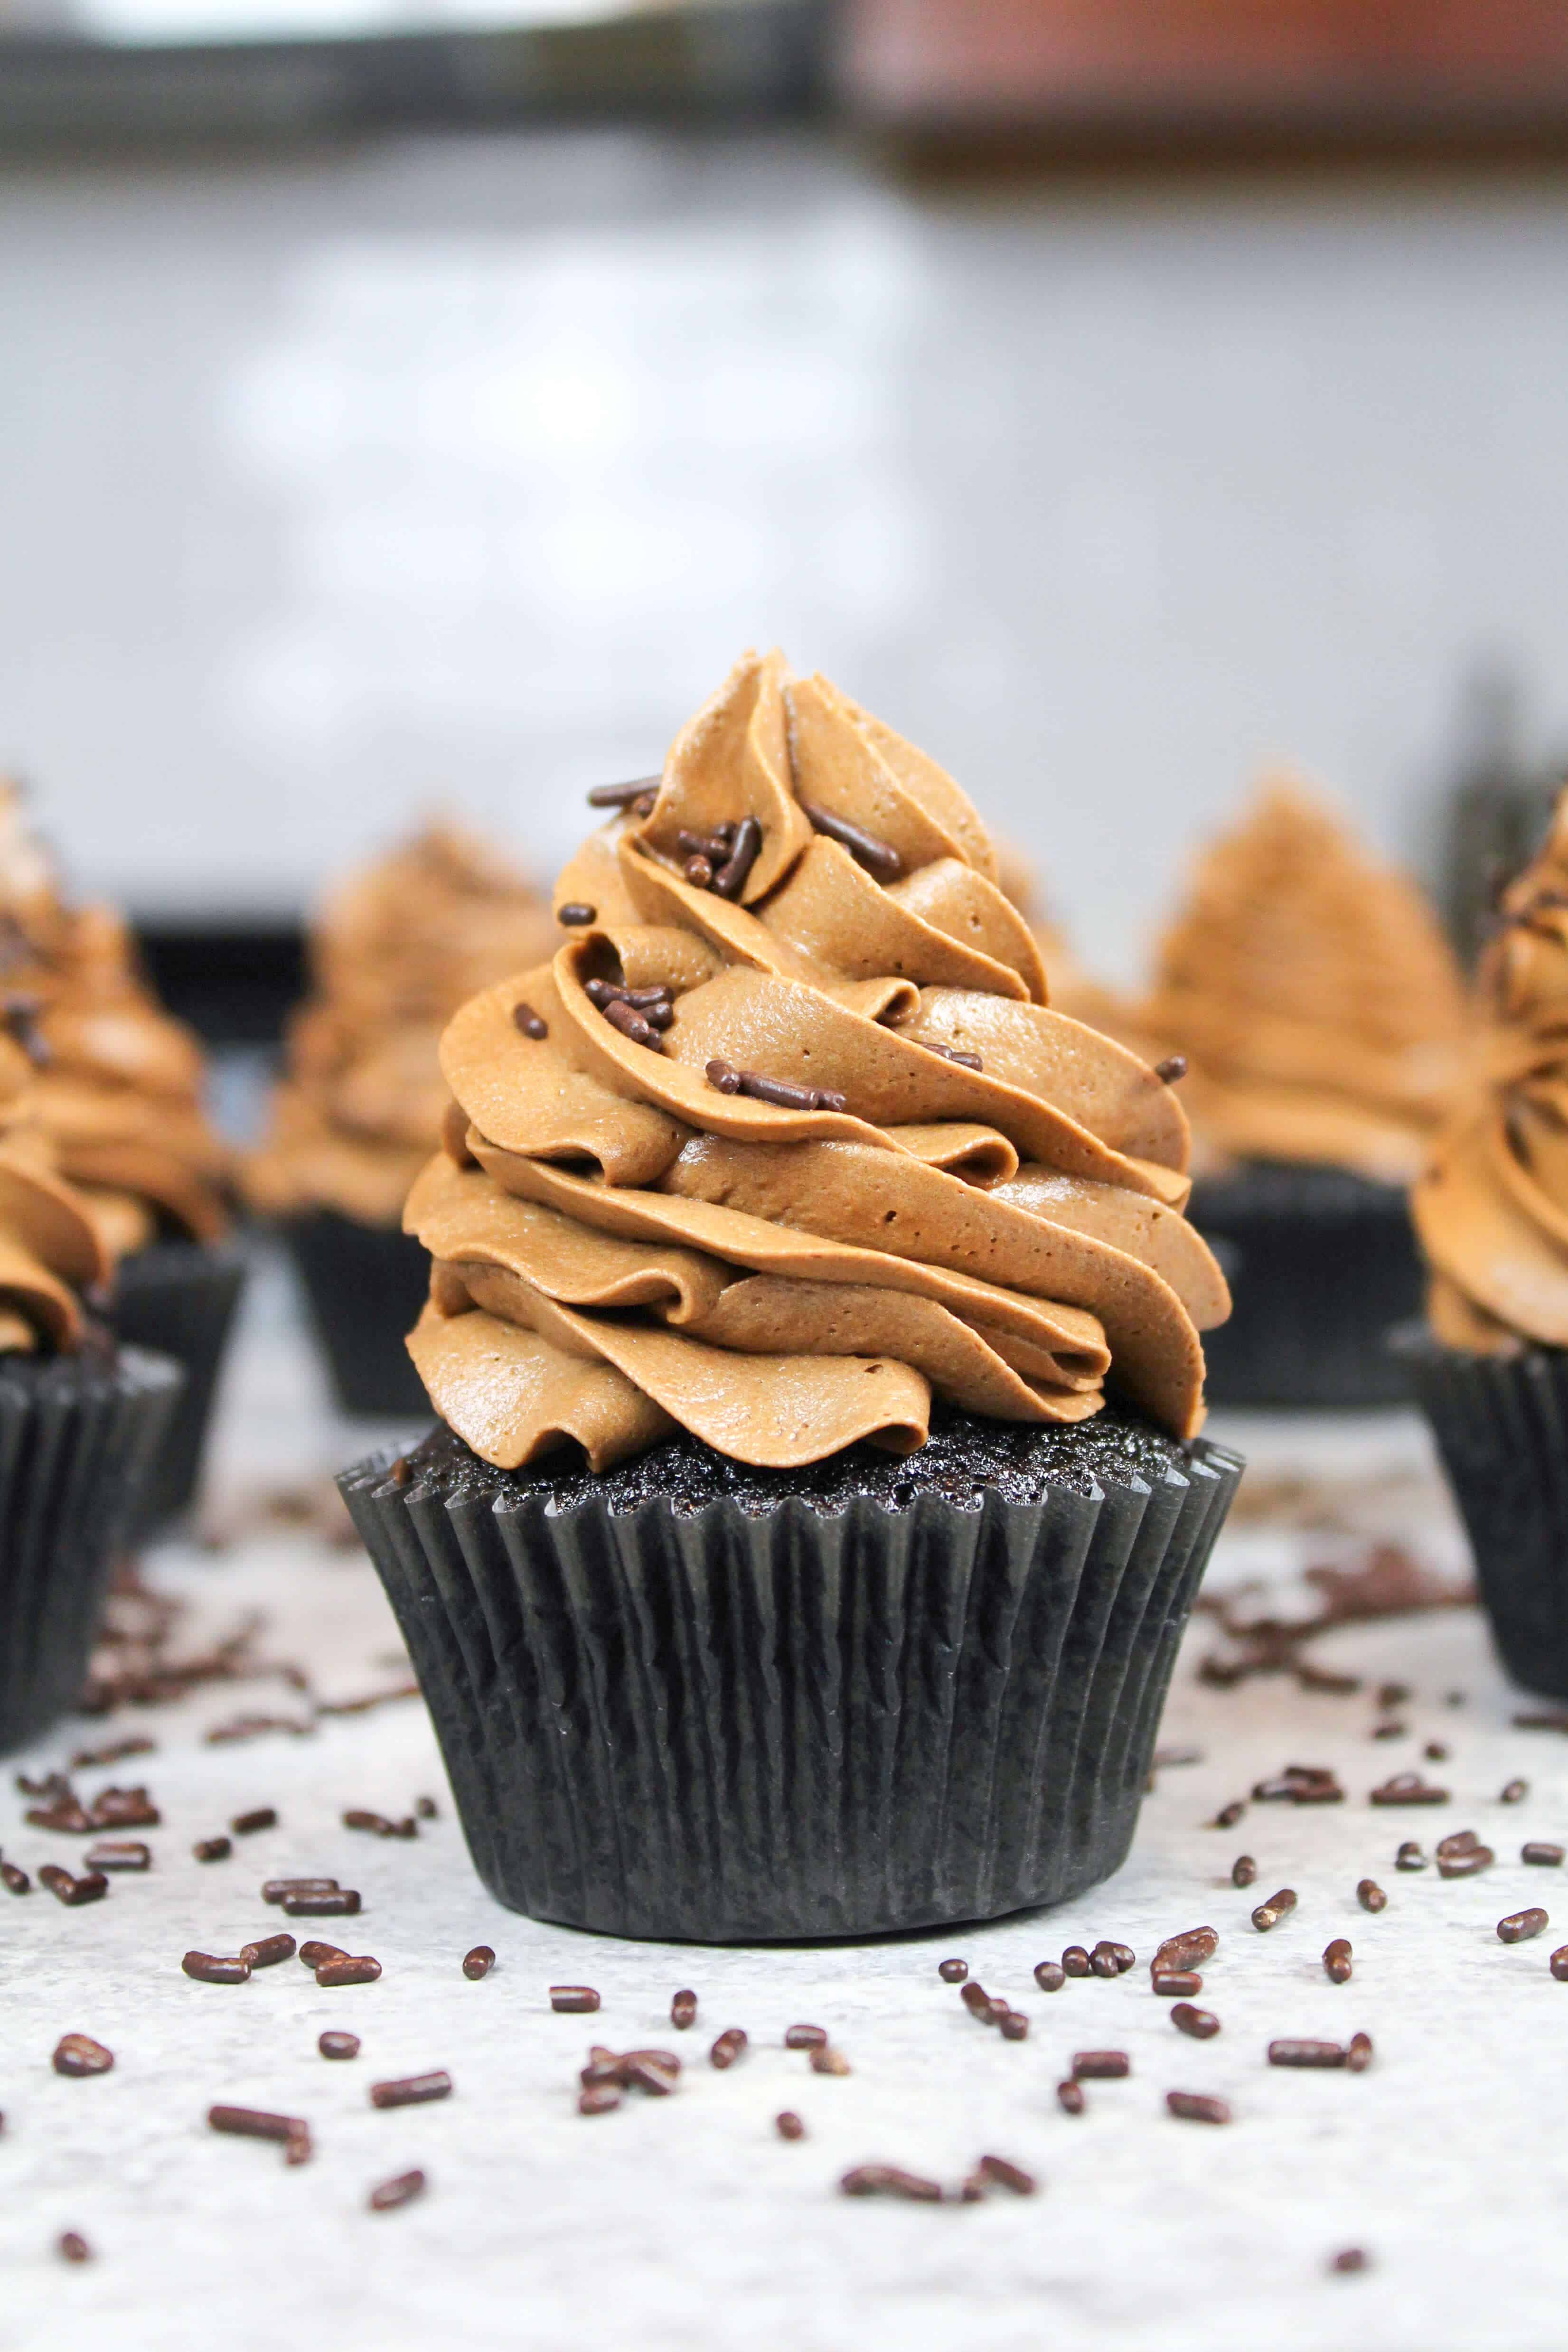 Moist Chocolate Cupcake Recipe With Chocolate Frosting - Chelsweets